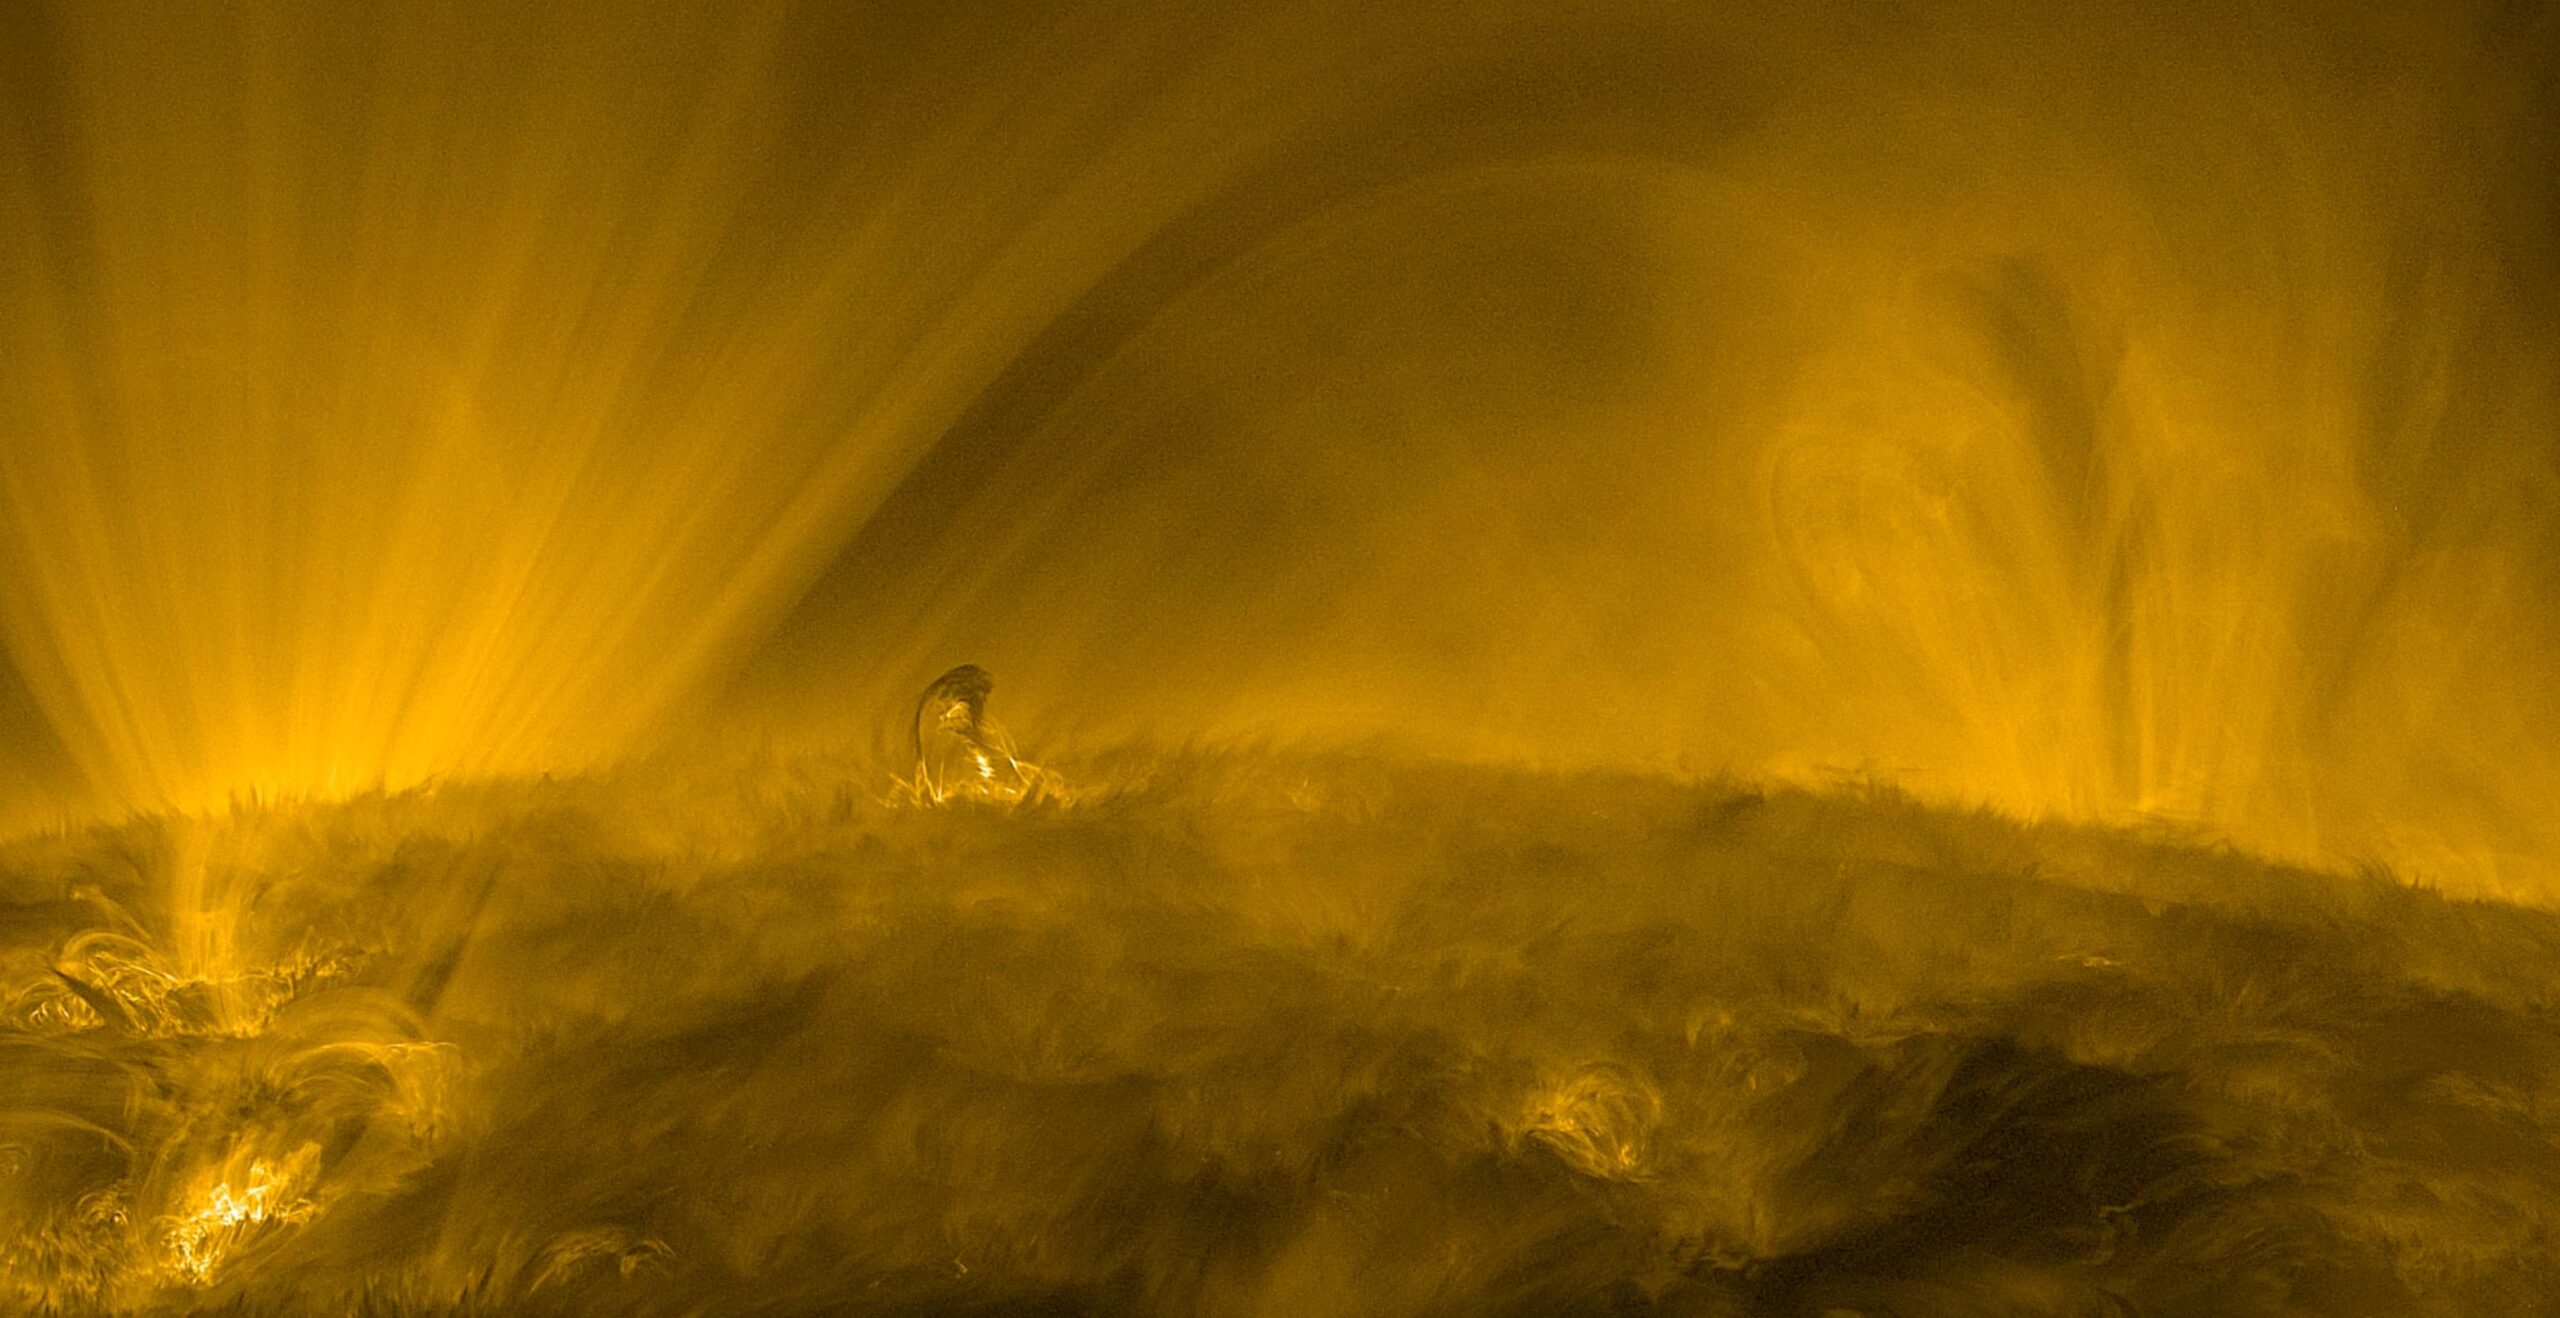 Solar Orbiter shows the “fluffy” surface of the Sun in exquisite detail: Video